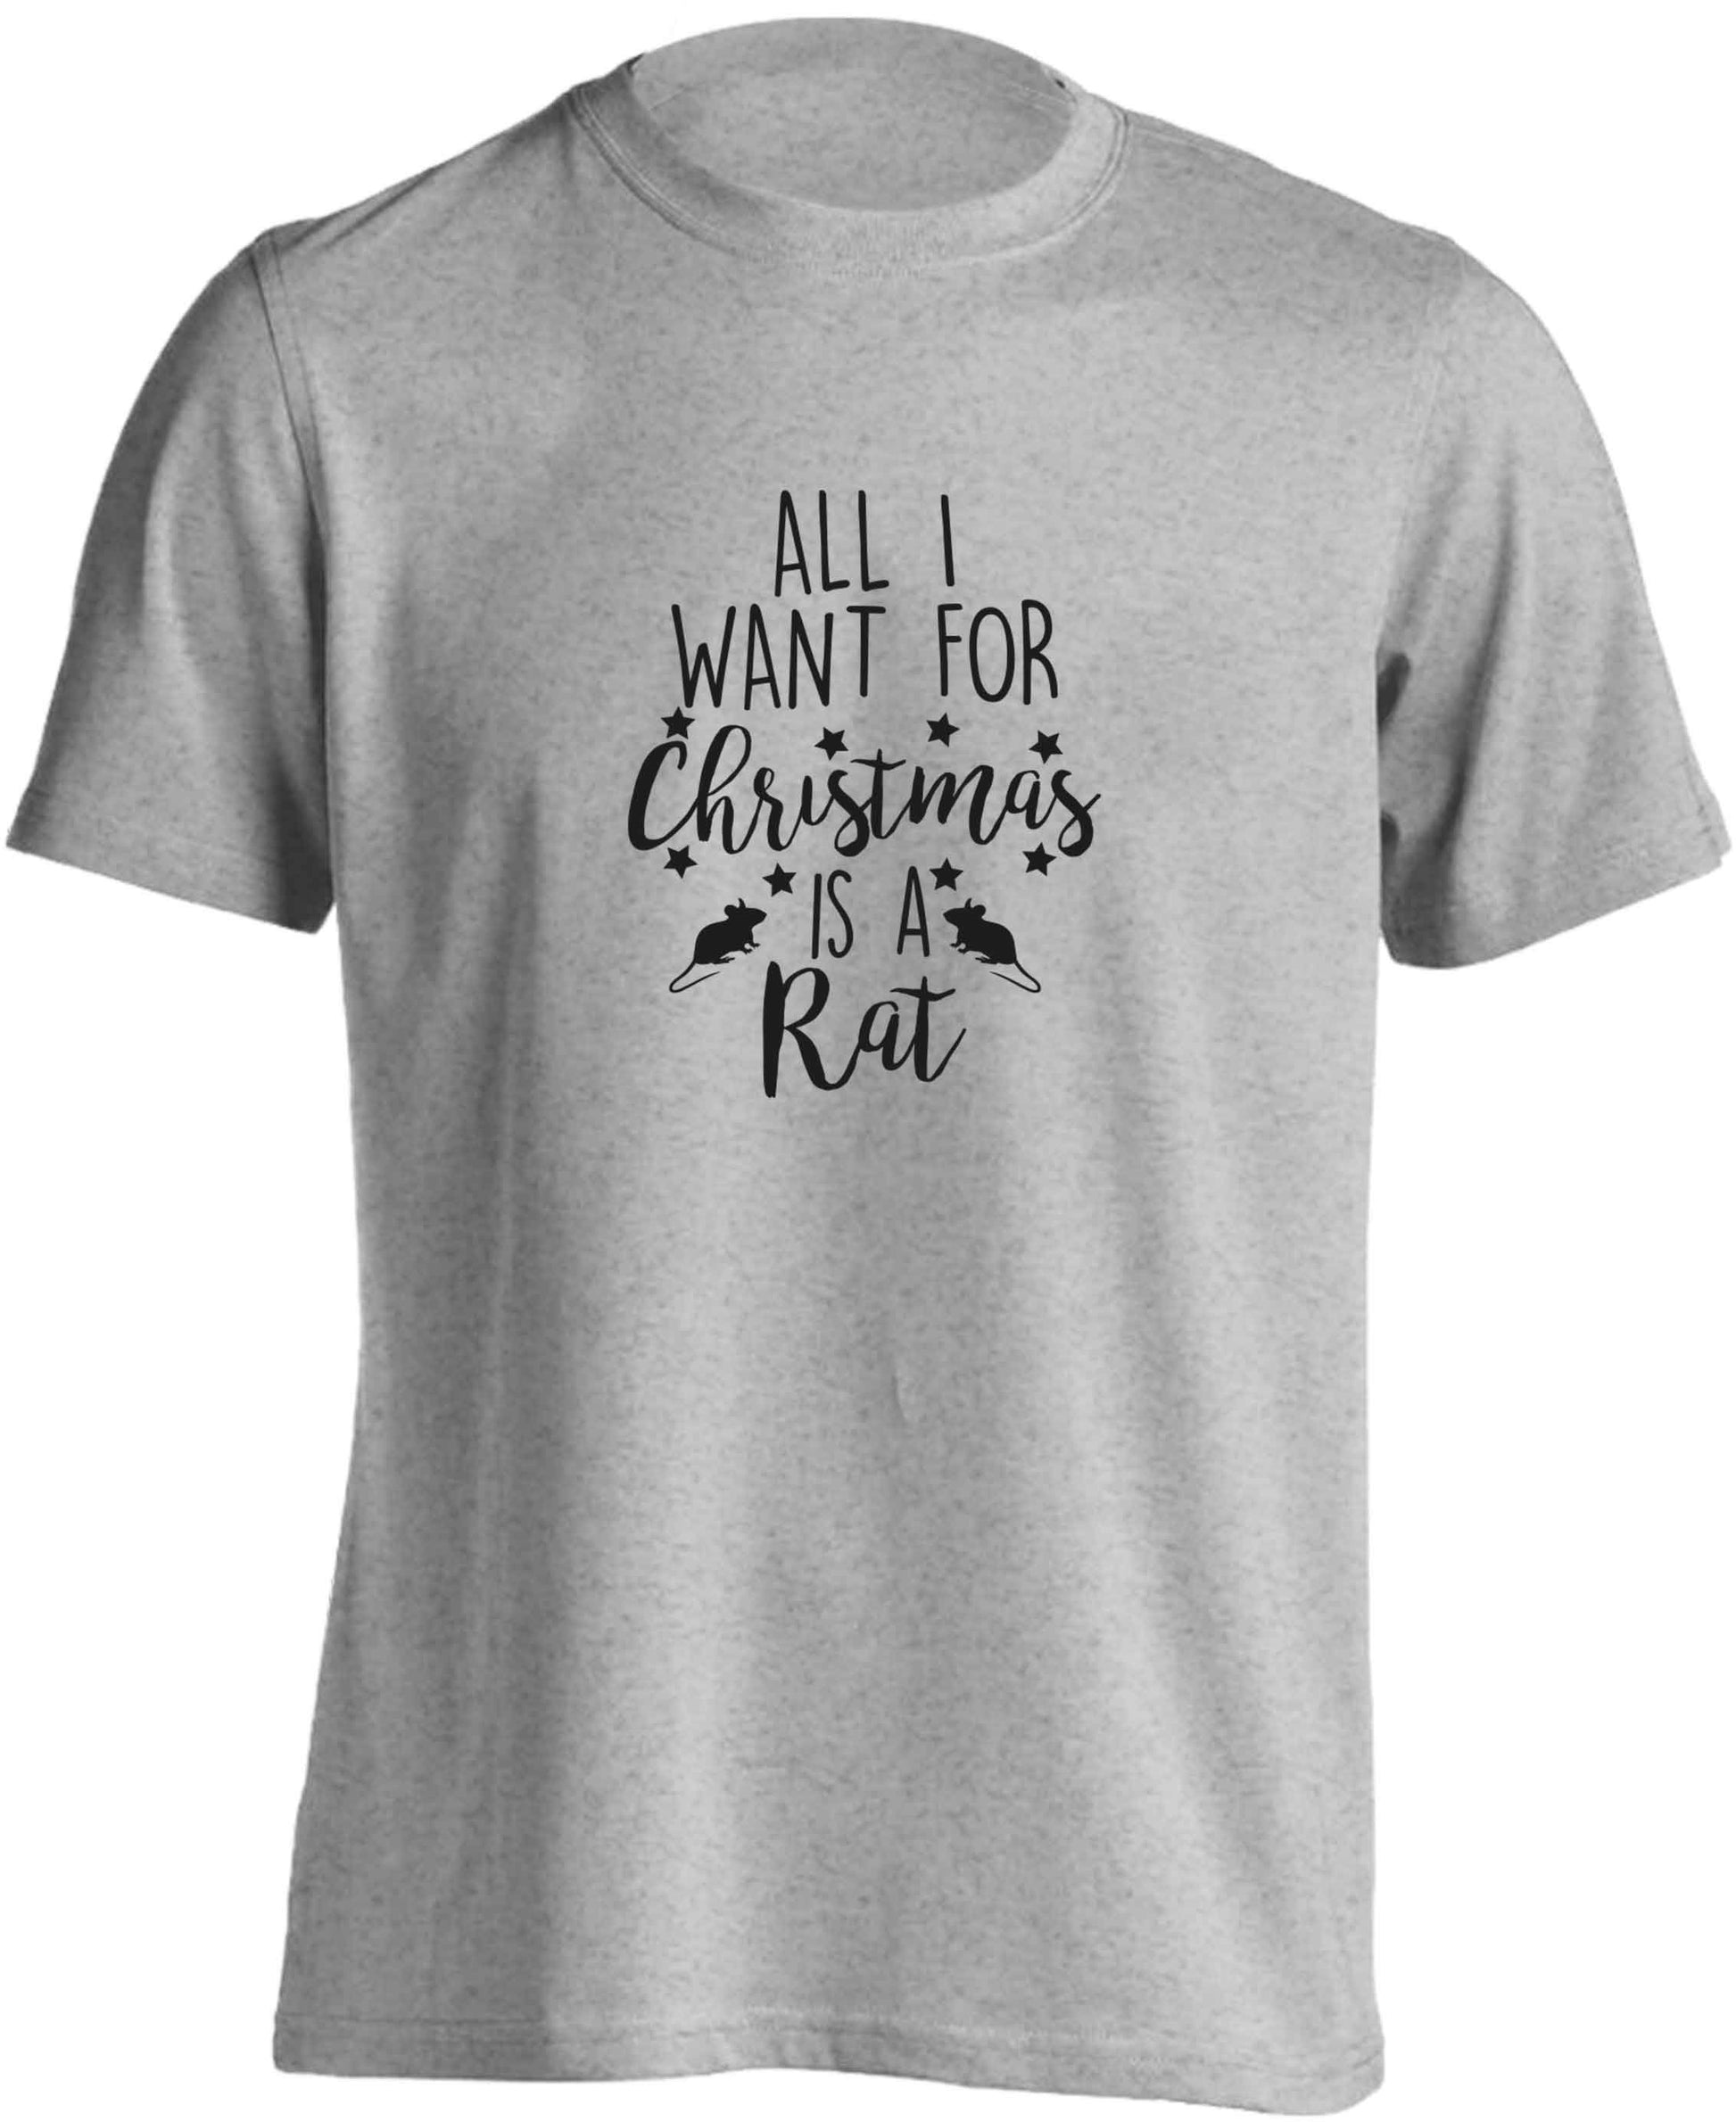 All I want for Christmas is a rat adults unisex grey Tshirt 2XL